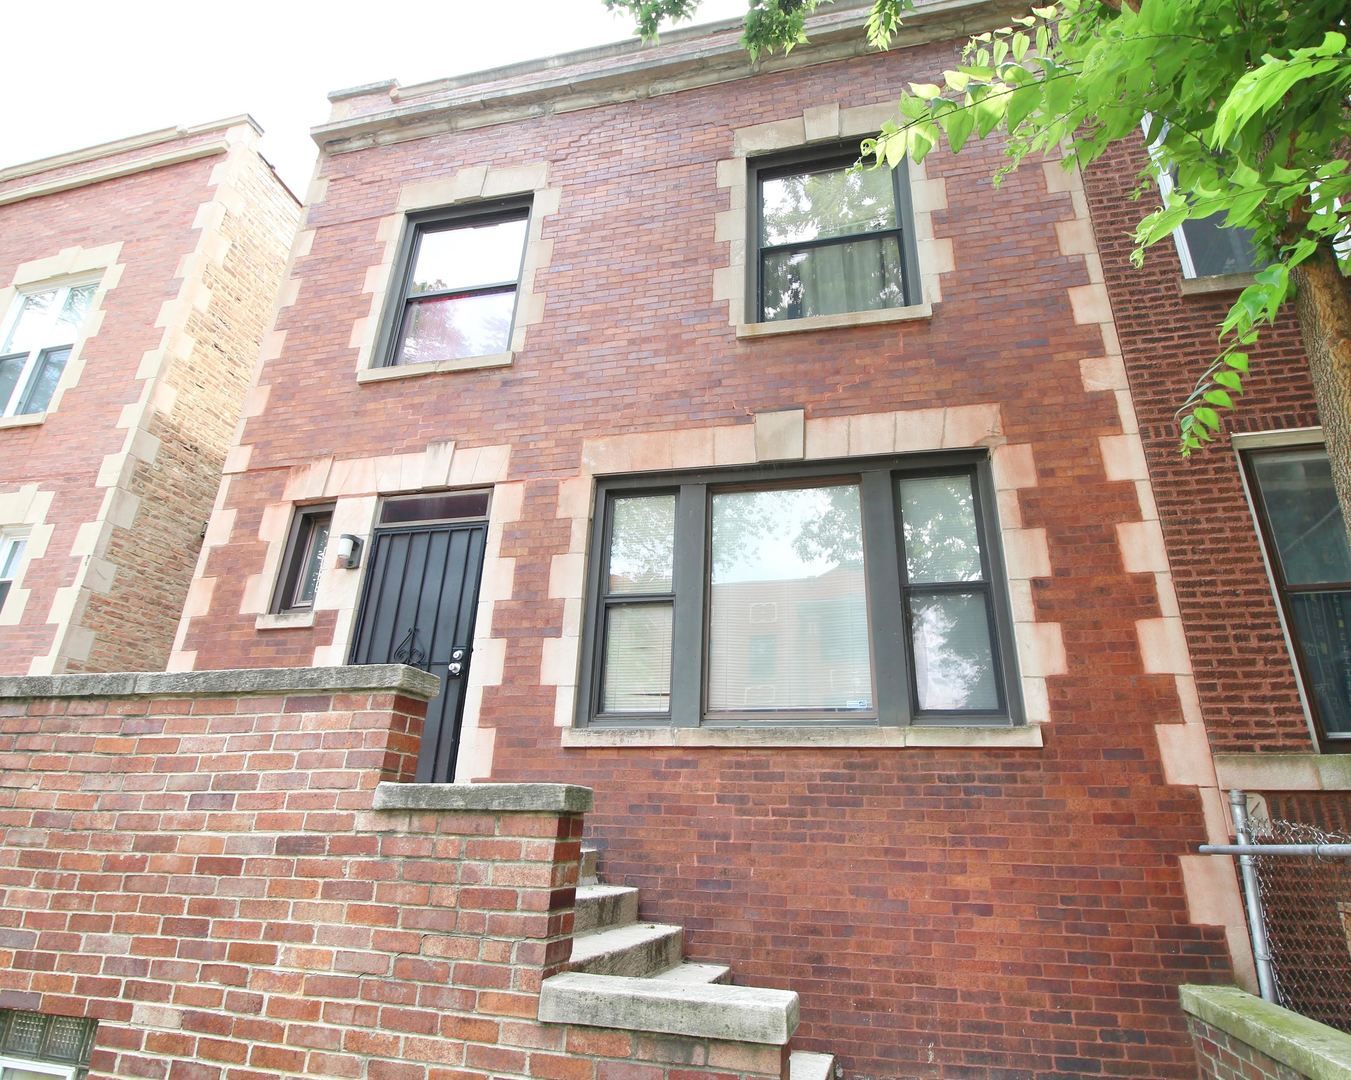 Main Photo: 6025 S Eberhart Avenue in Chicago: CHI - Woodlawn Residential for sale ()  : MLS®# 11257047